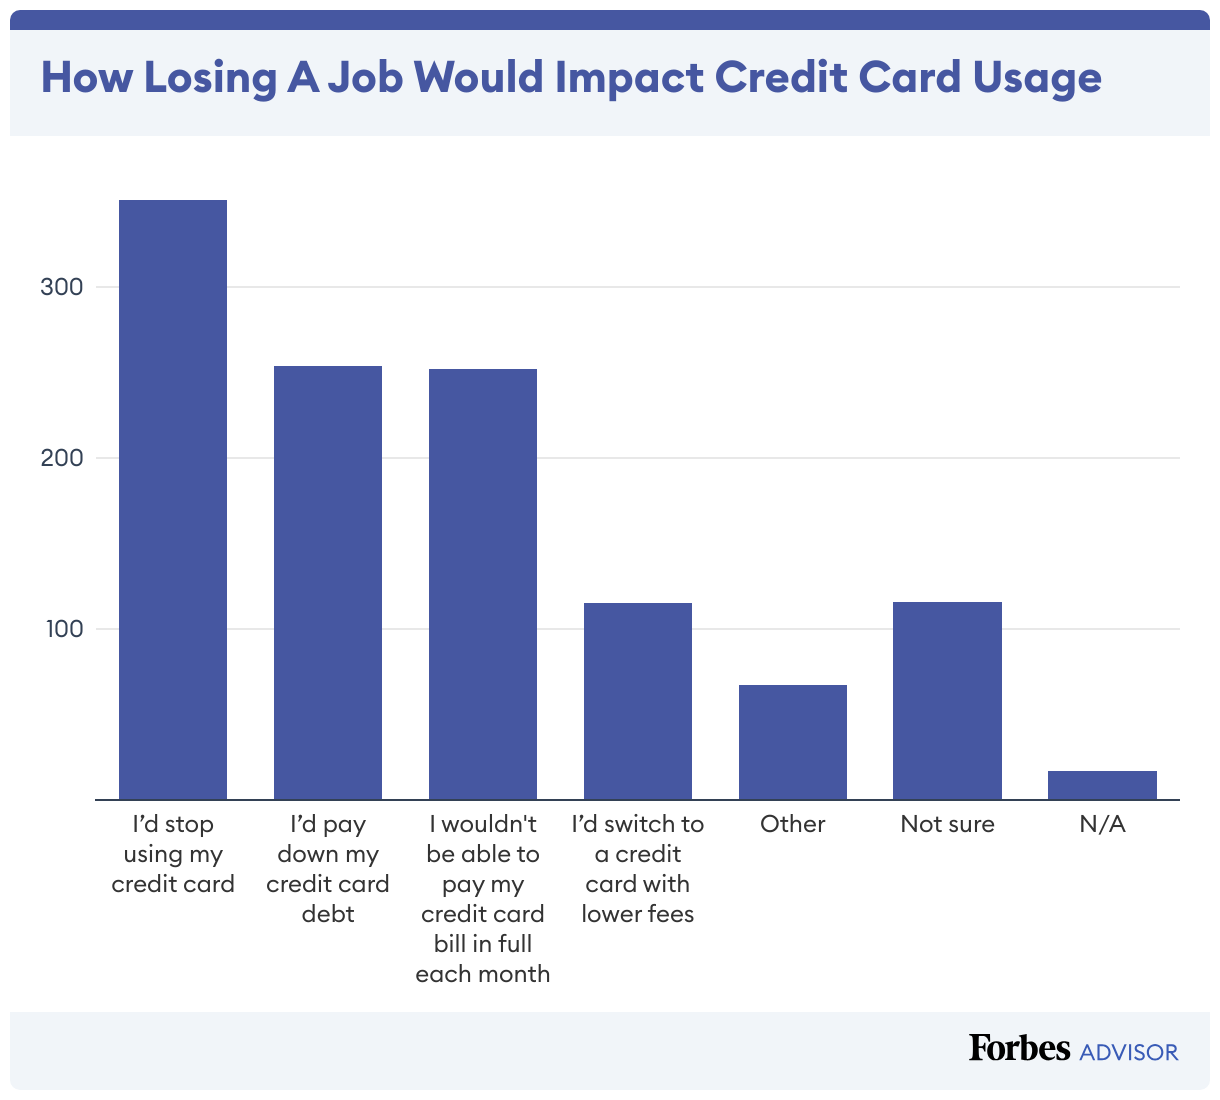 Bar graph of survey results defining how respondents would change their credit card habits if they (or a household member) lost a job.